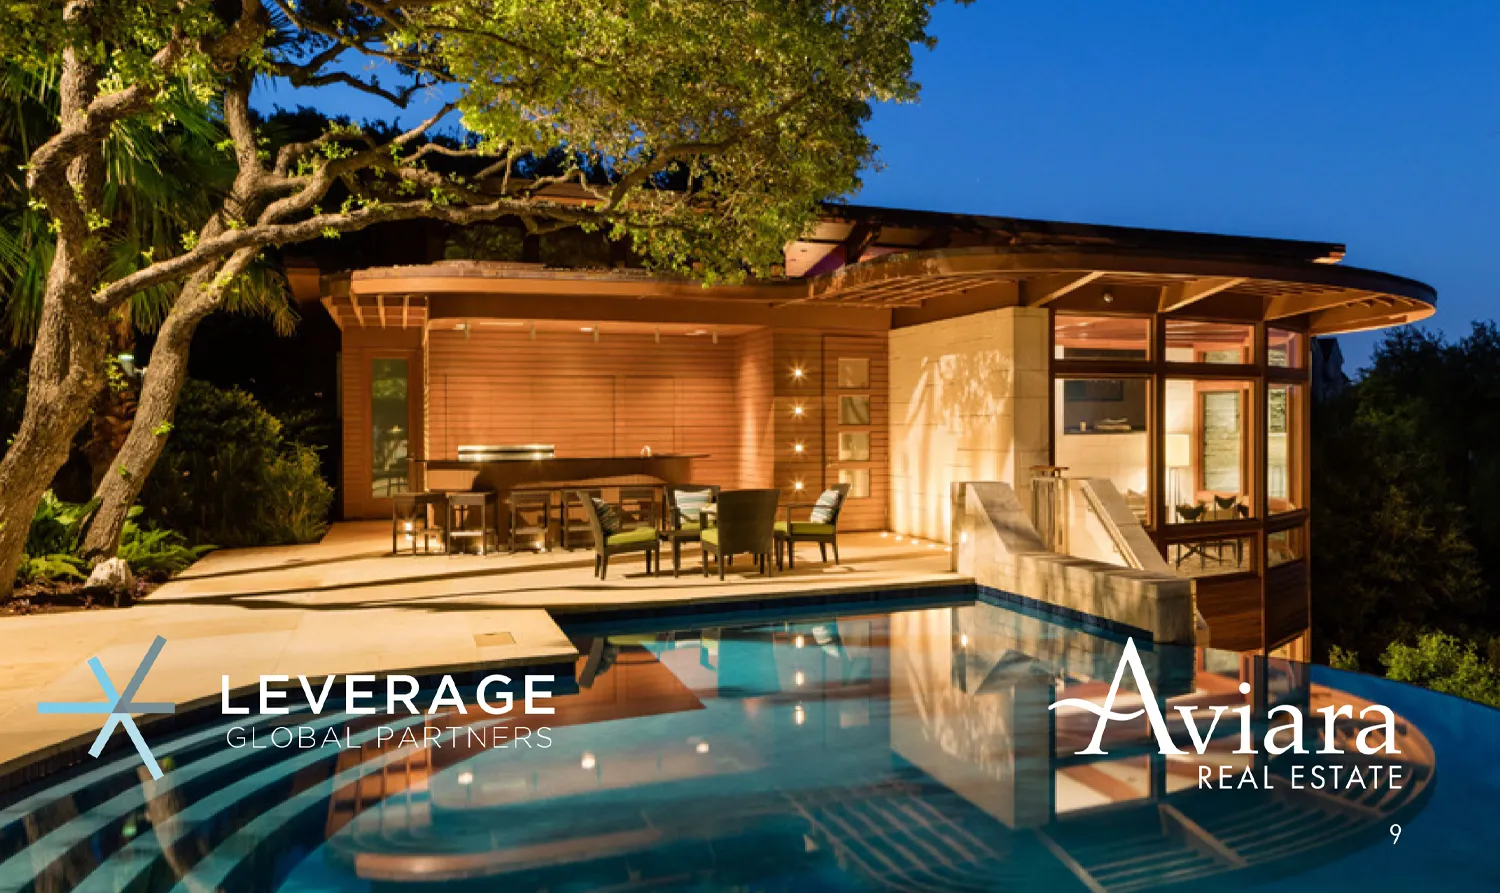 Aviara Real Estate is proud to be partnered with Leverage Global Partners